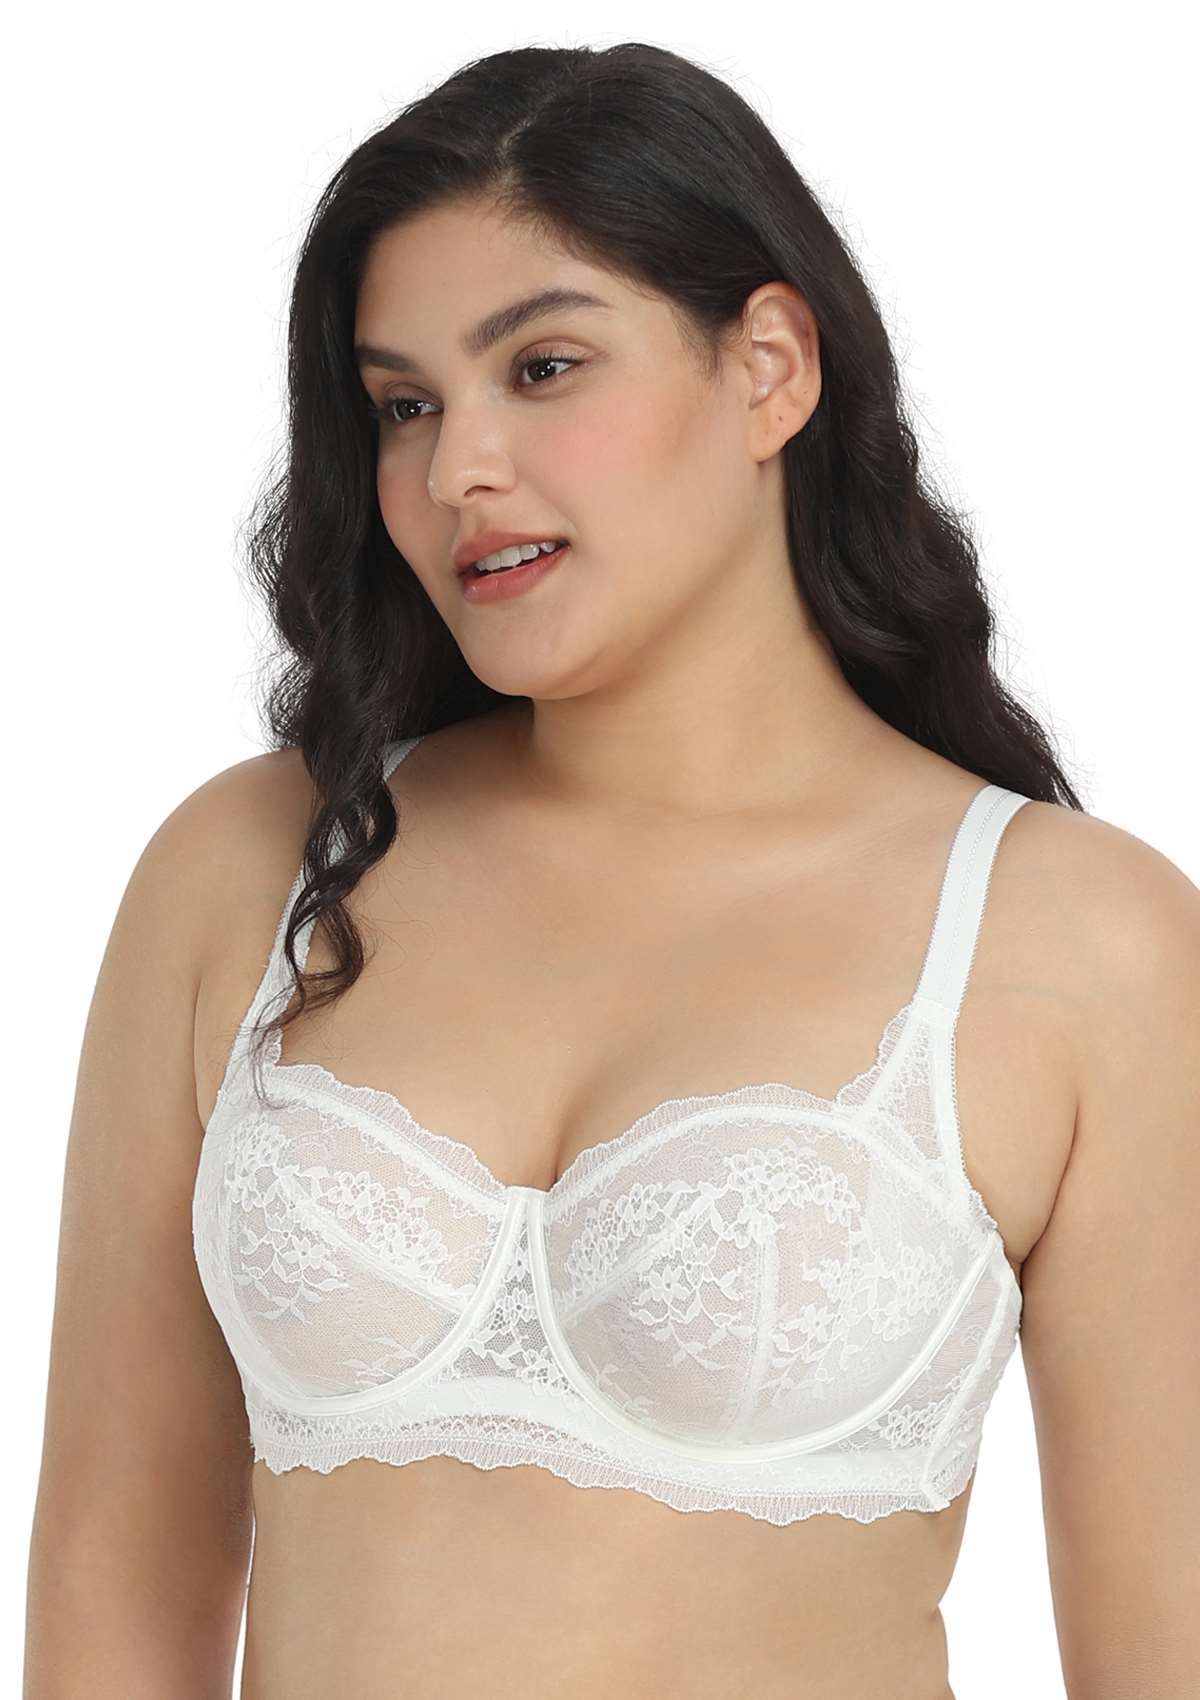 HSIA I Do Floral Lace Bridal Balconette Beautiful Bra For Special Day - Burgundy / 38 / DD/E